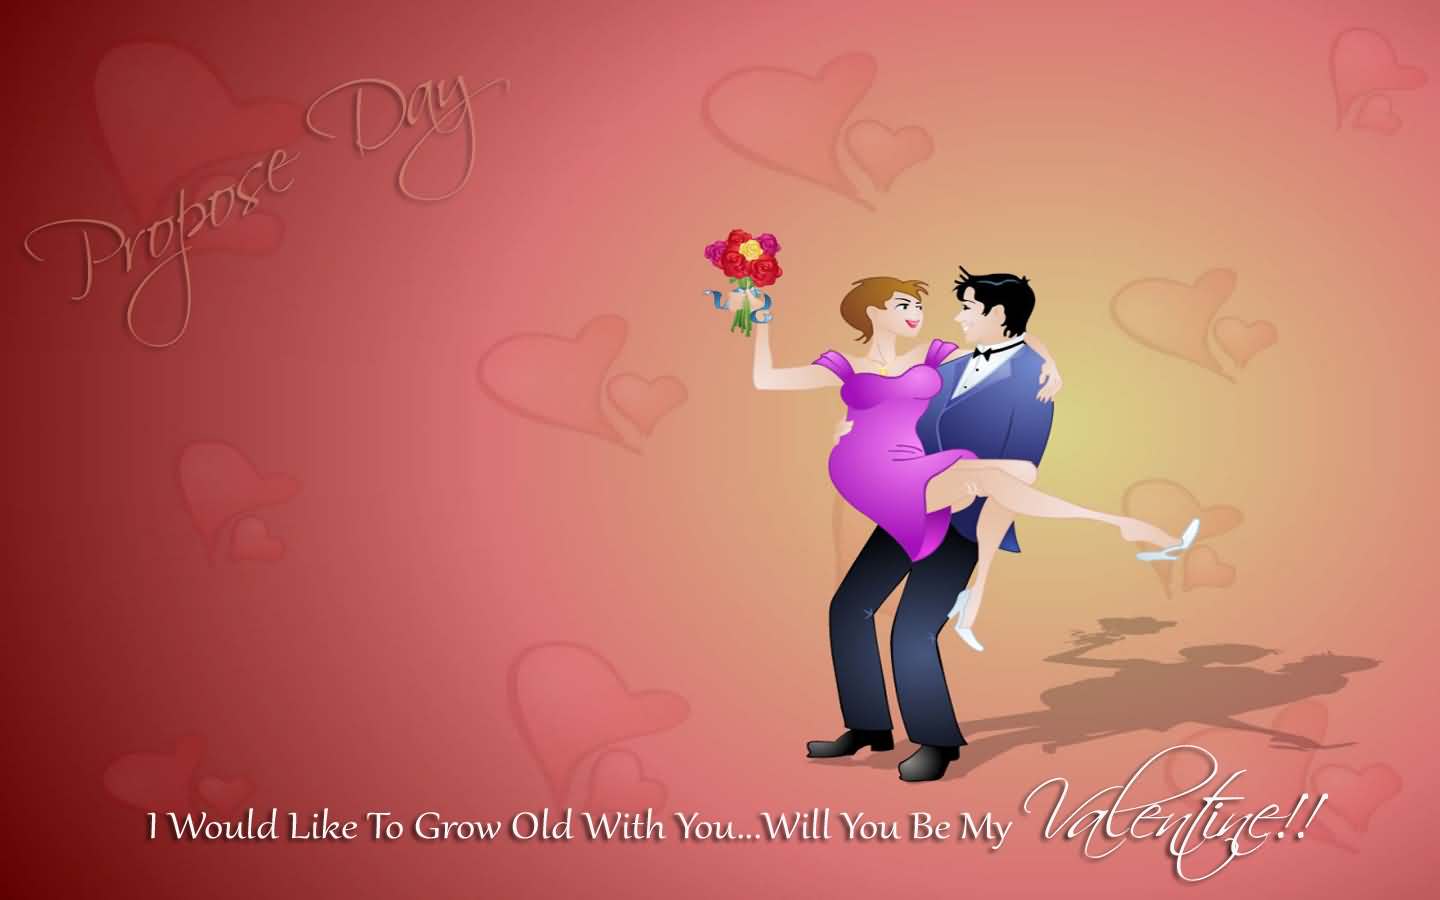 propose day i would like to grow old with you will you be my valentine